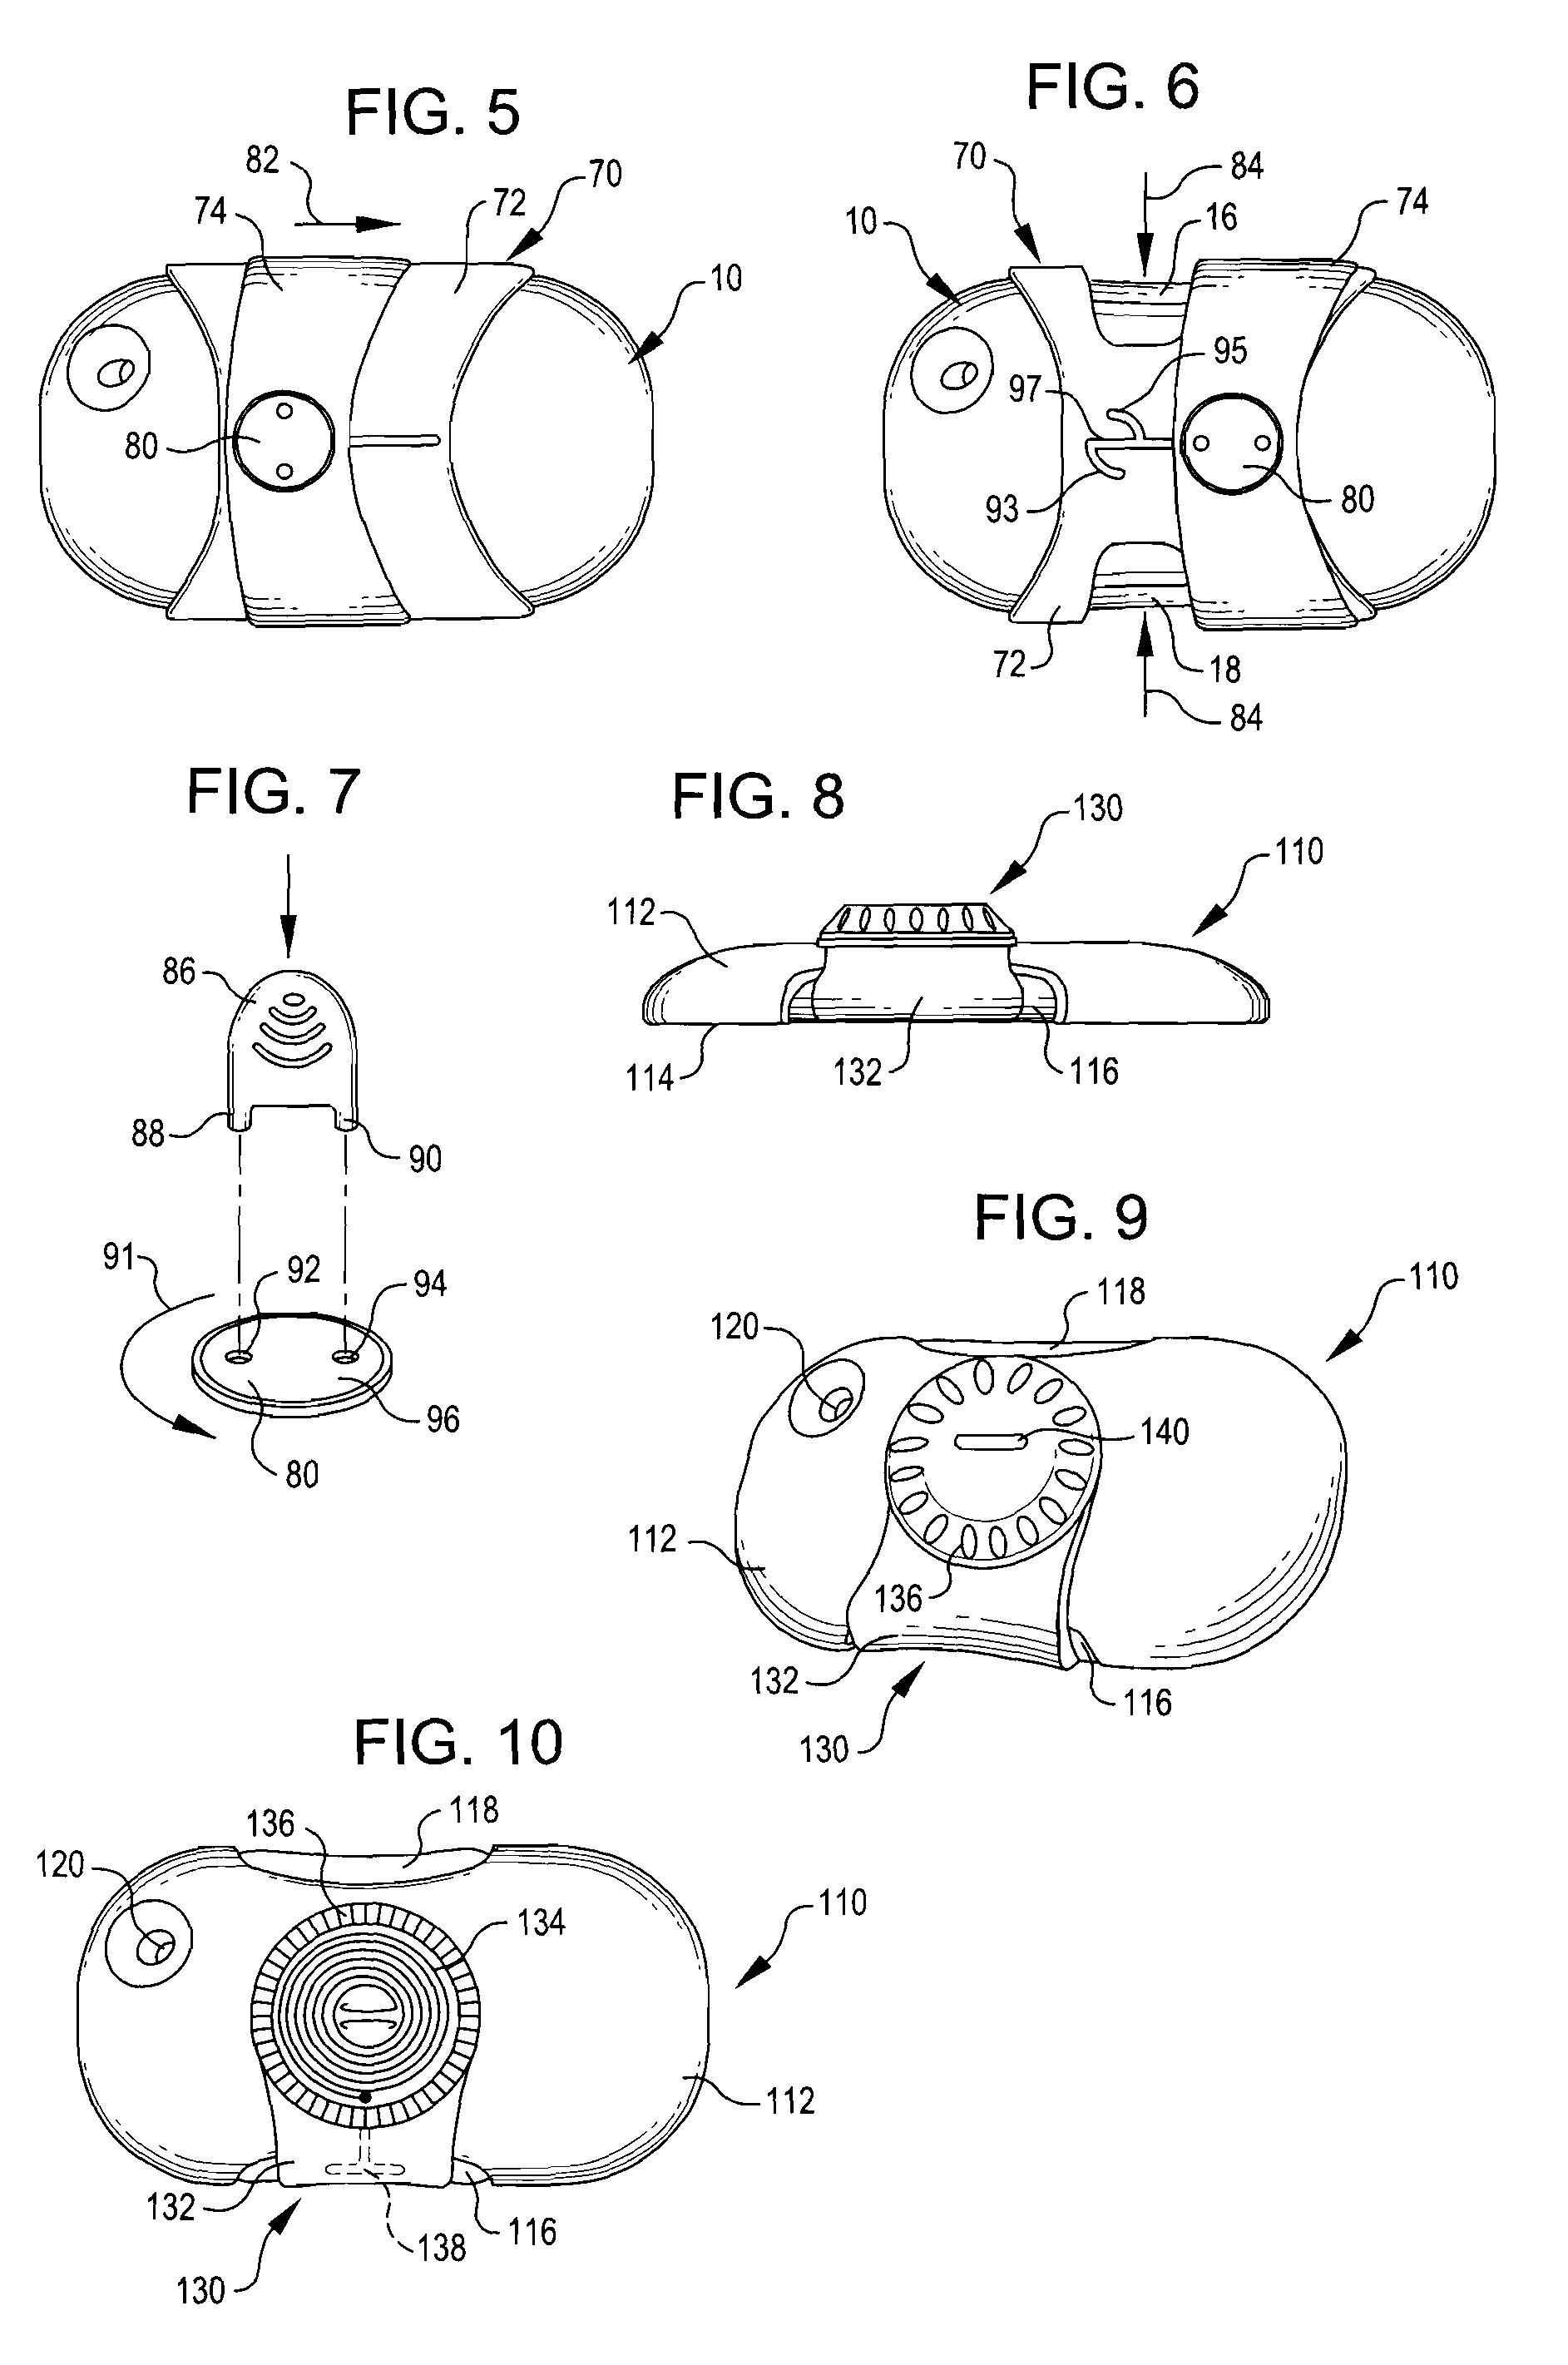 Disposable infusion device with actuation lock-out